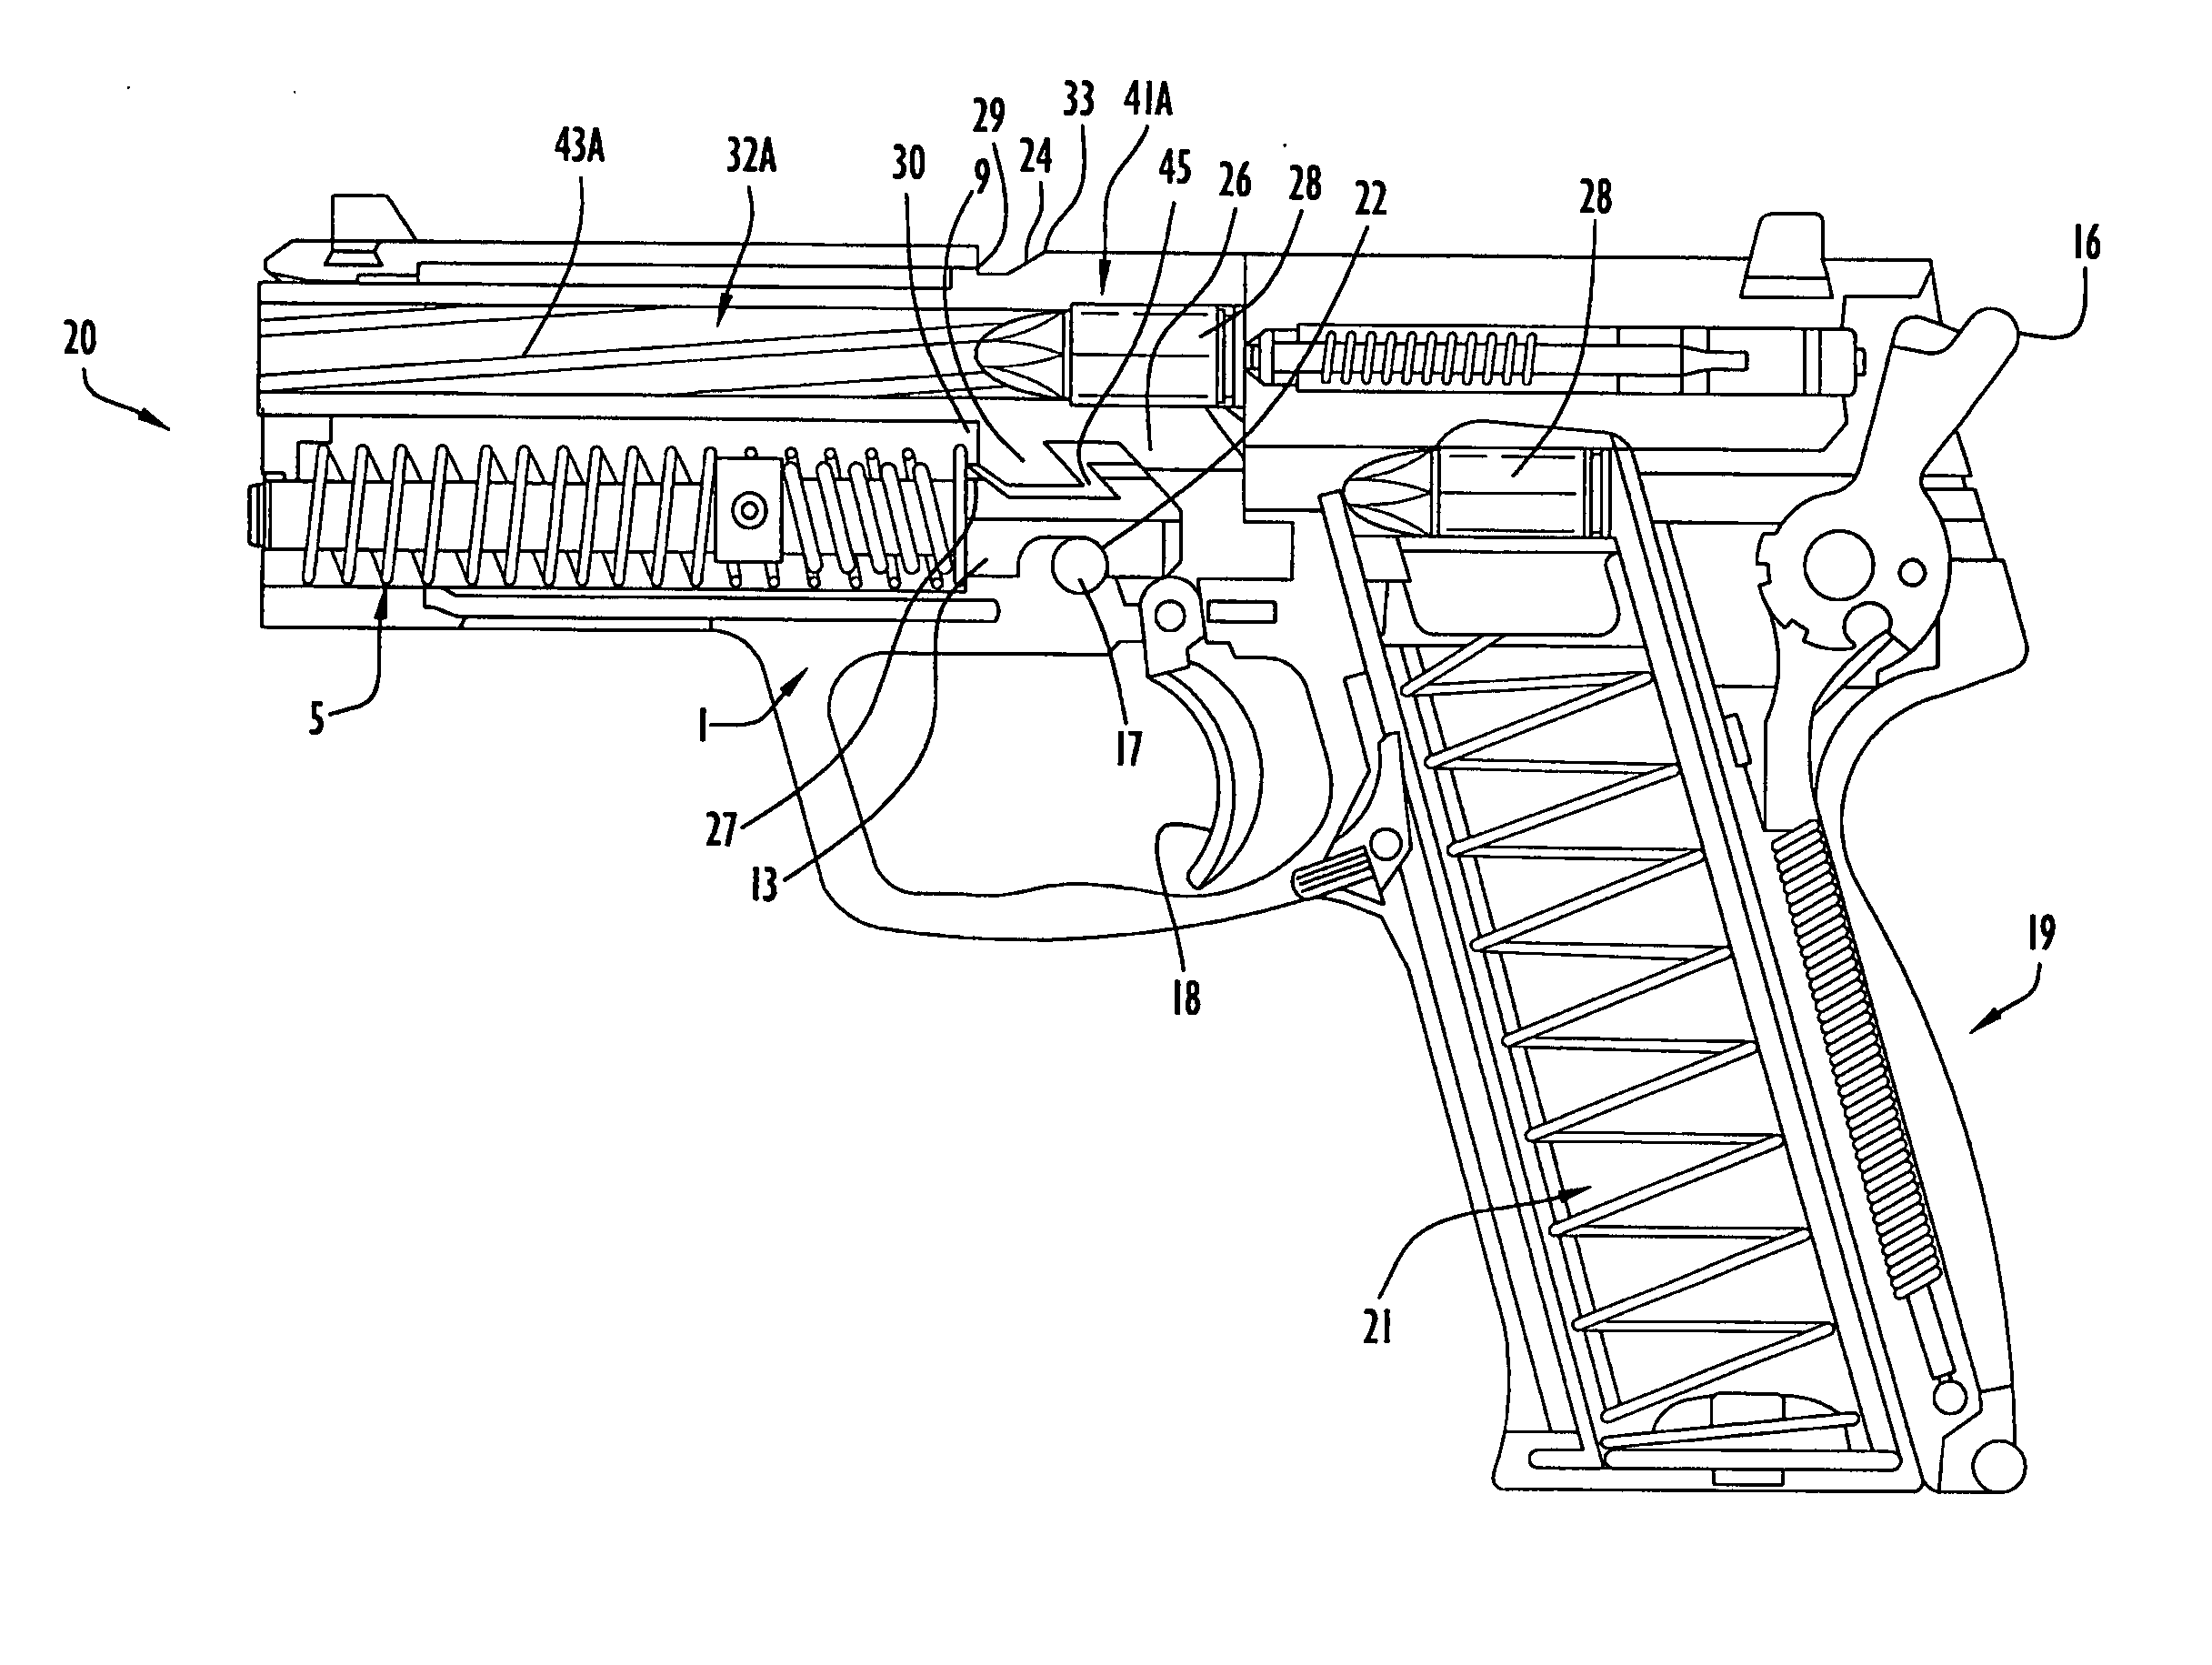 Blank firing barrels for semiautomatic pistols and method of repetitive blank fire